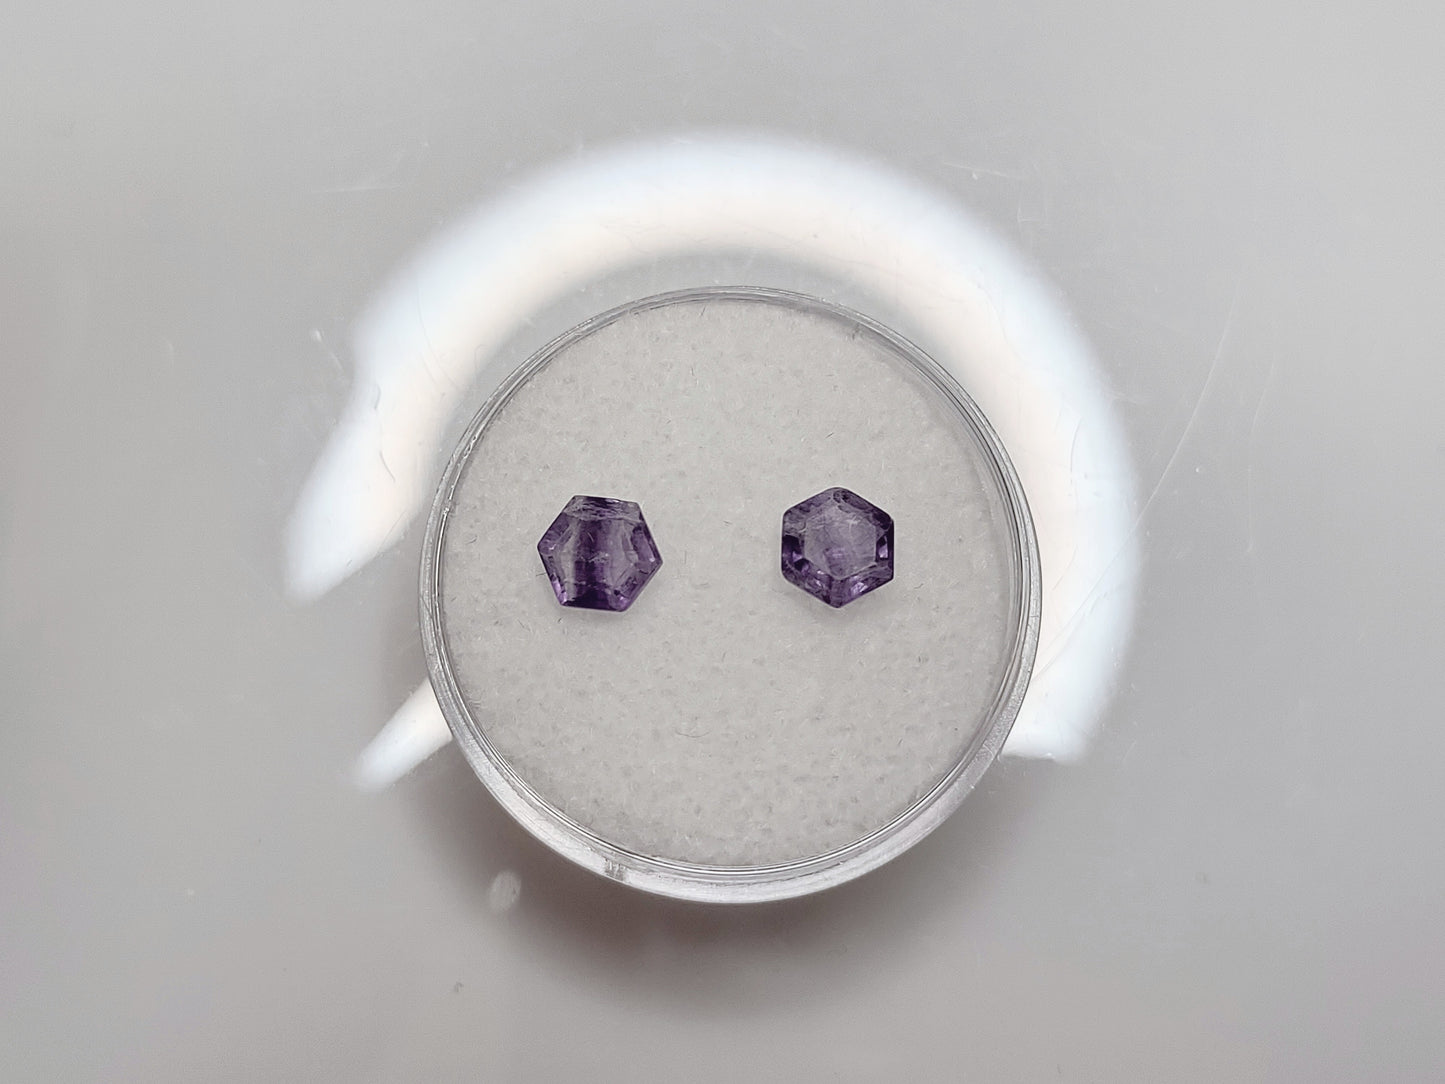 Two small 5x5mm hexagon cut purple and lavender striped fluorite gems.